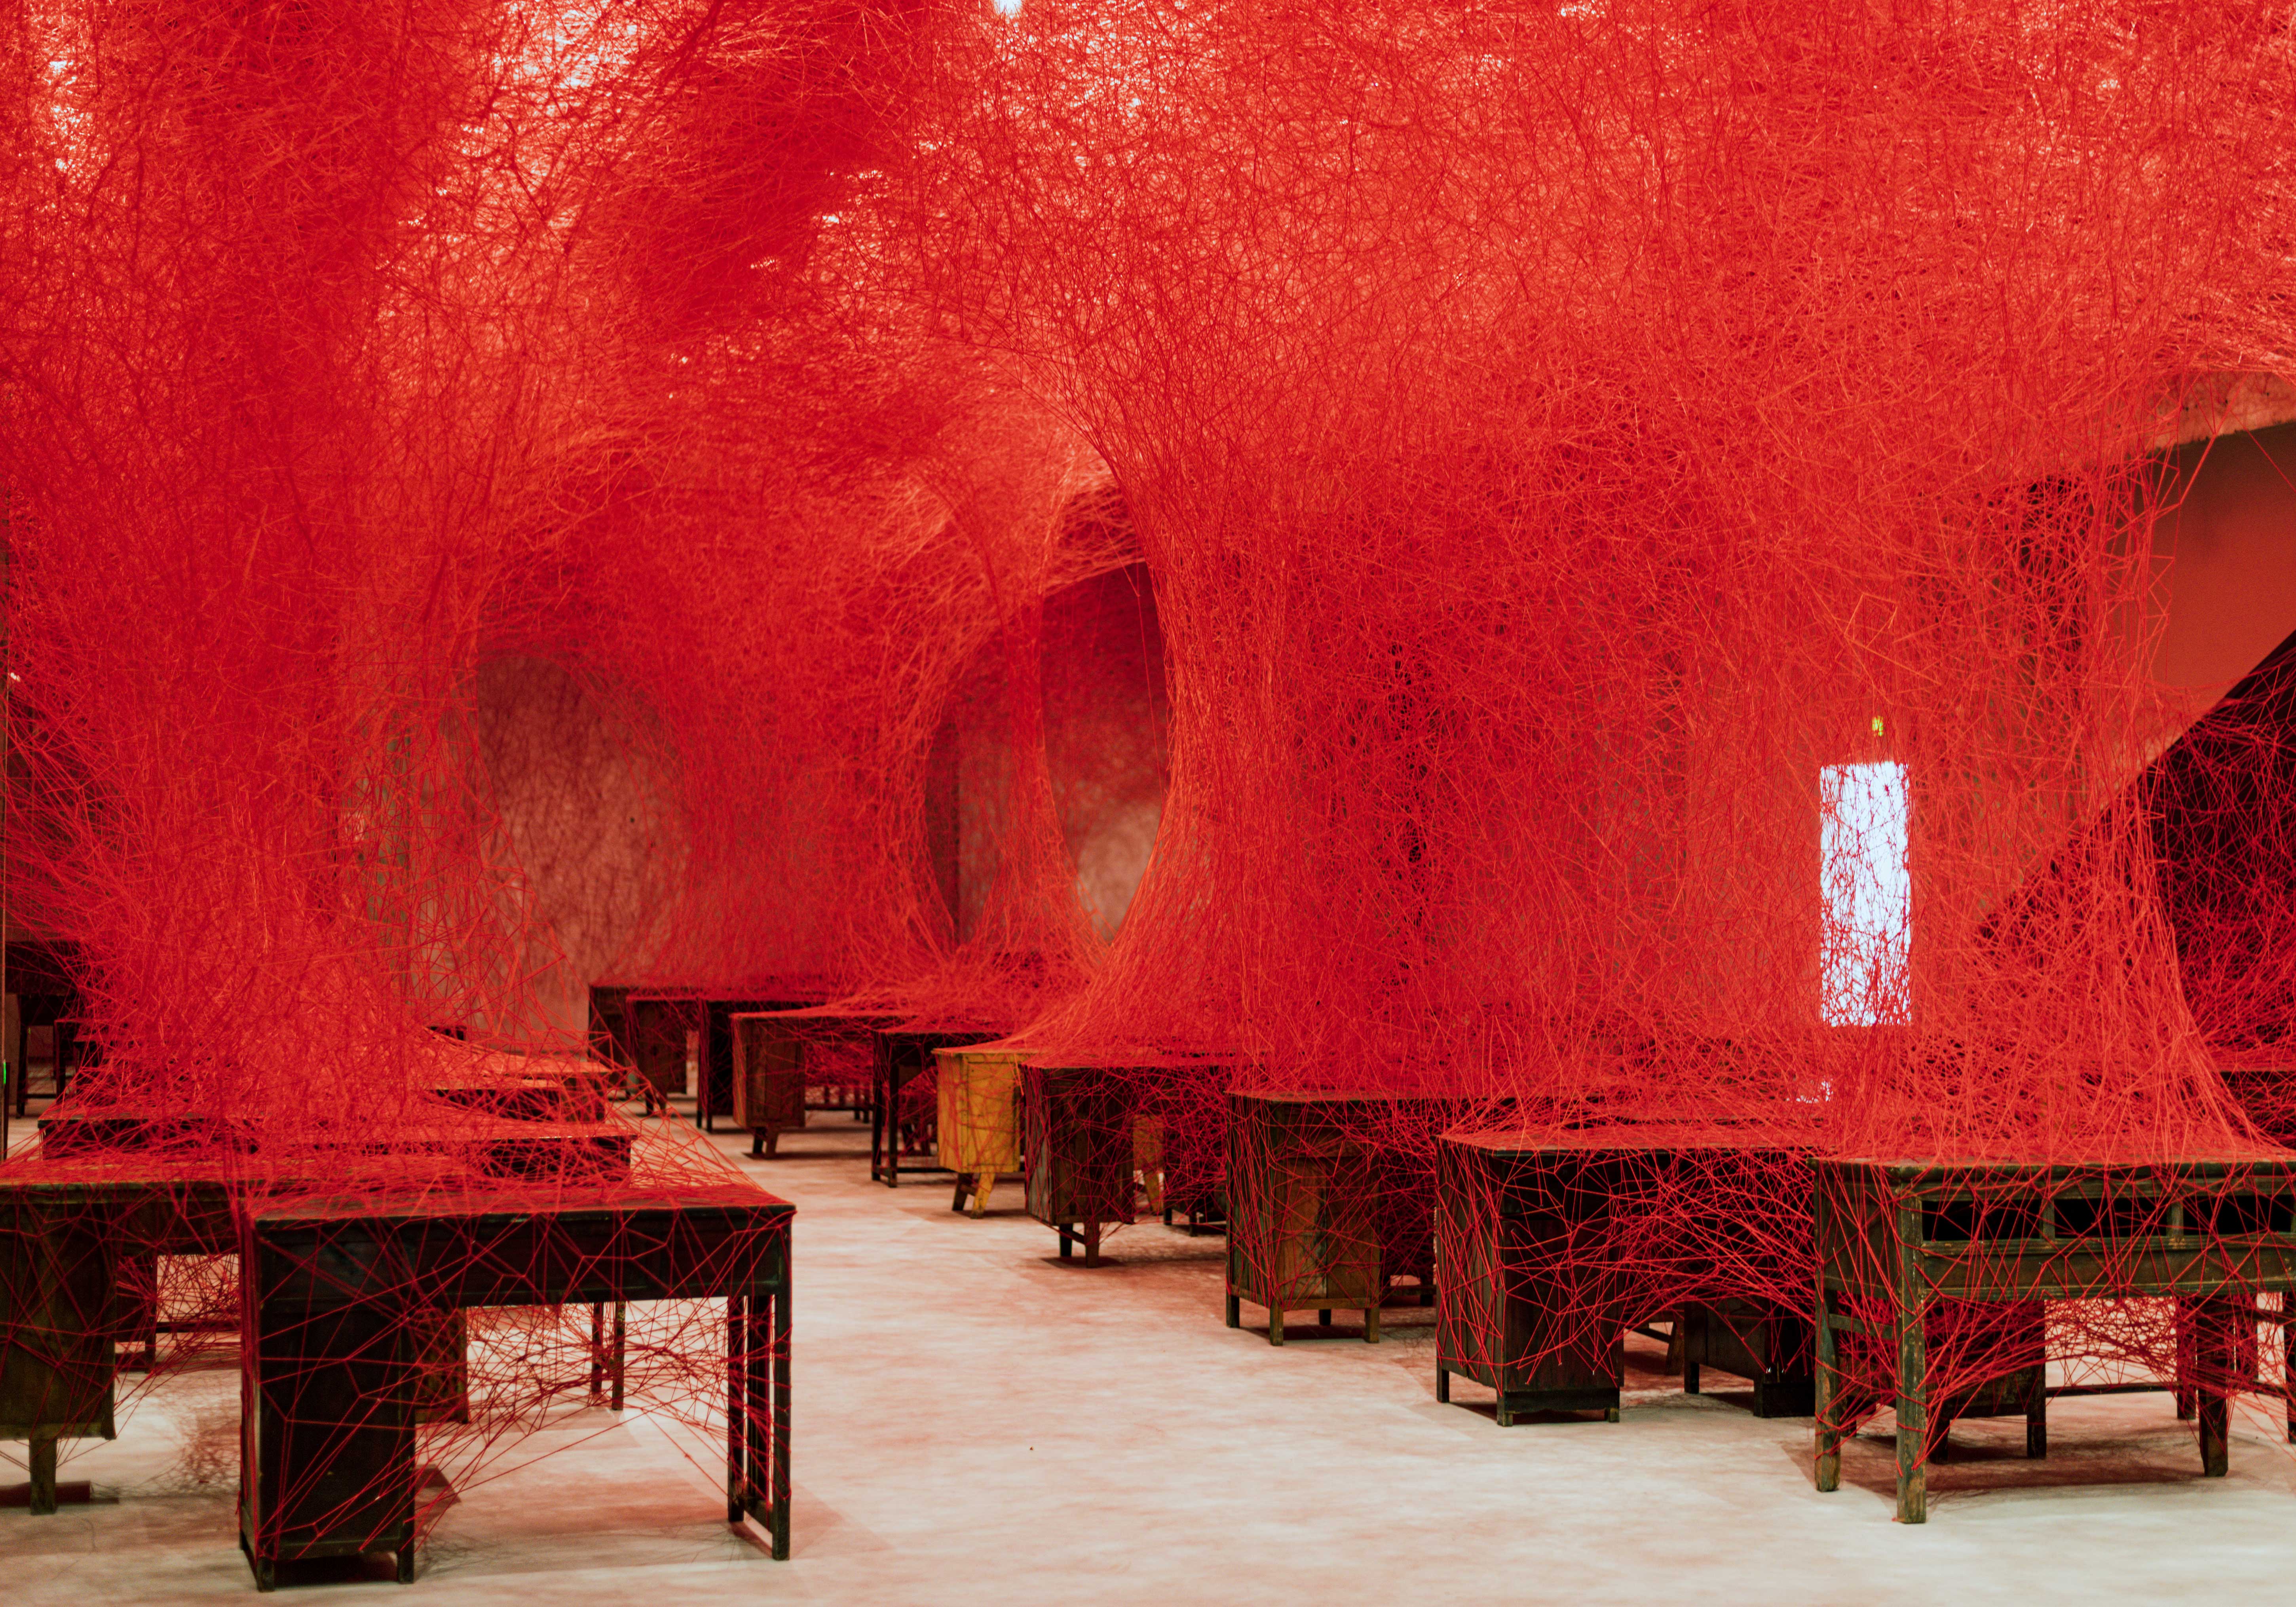 Conversations Between Others by Chiharu Shiota